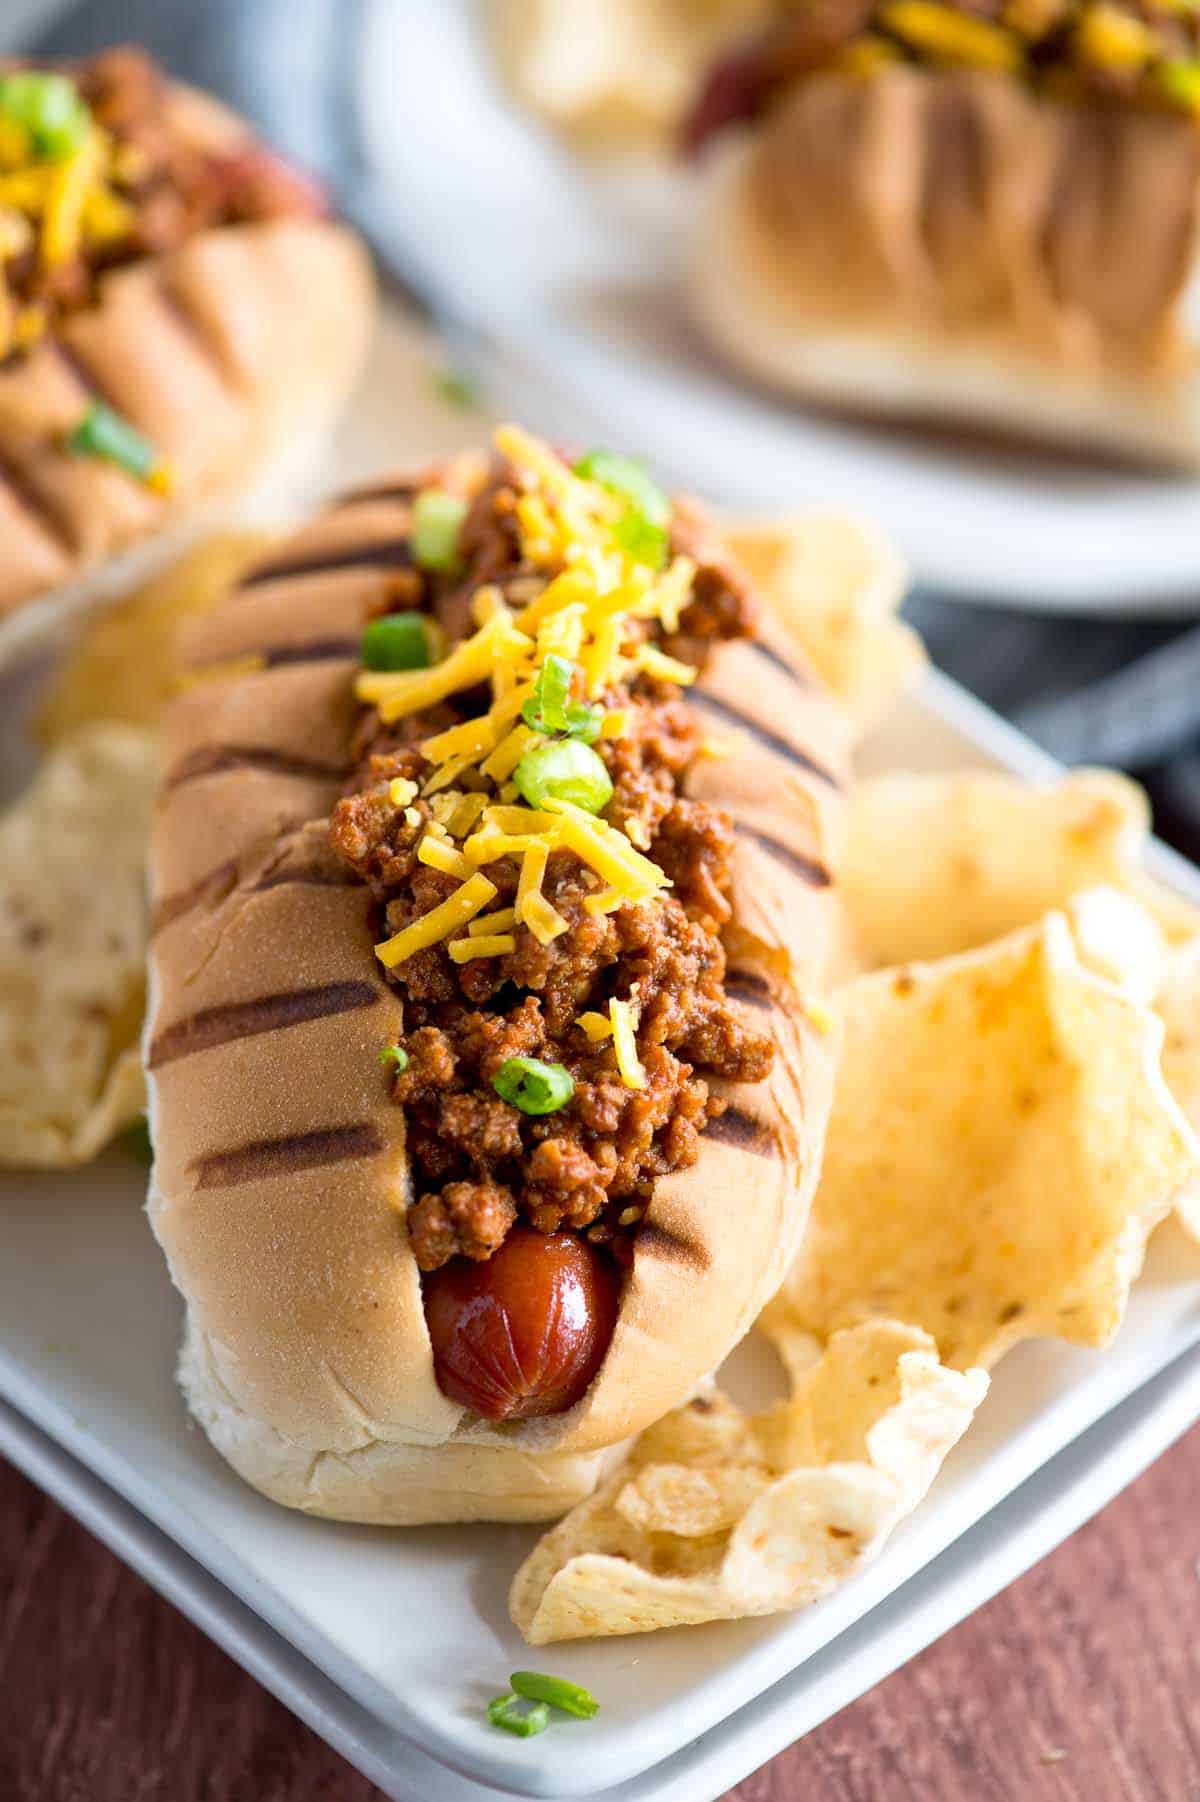 michigan hot dog on a plate with chips